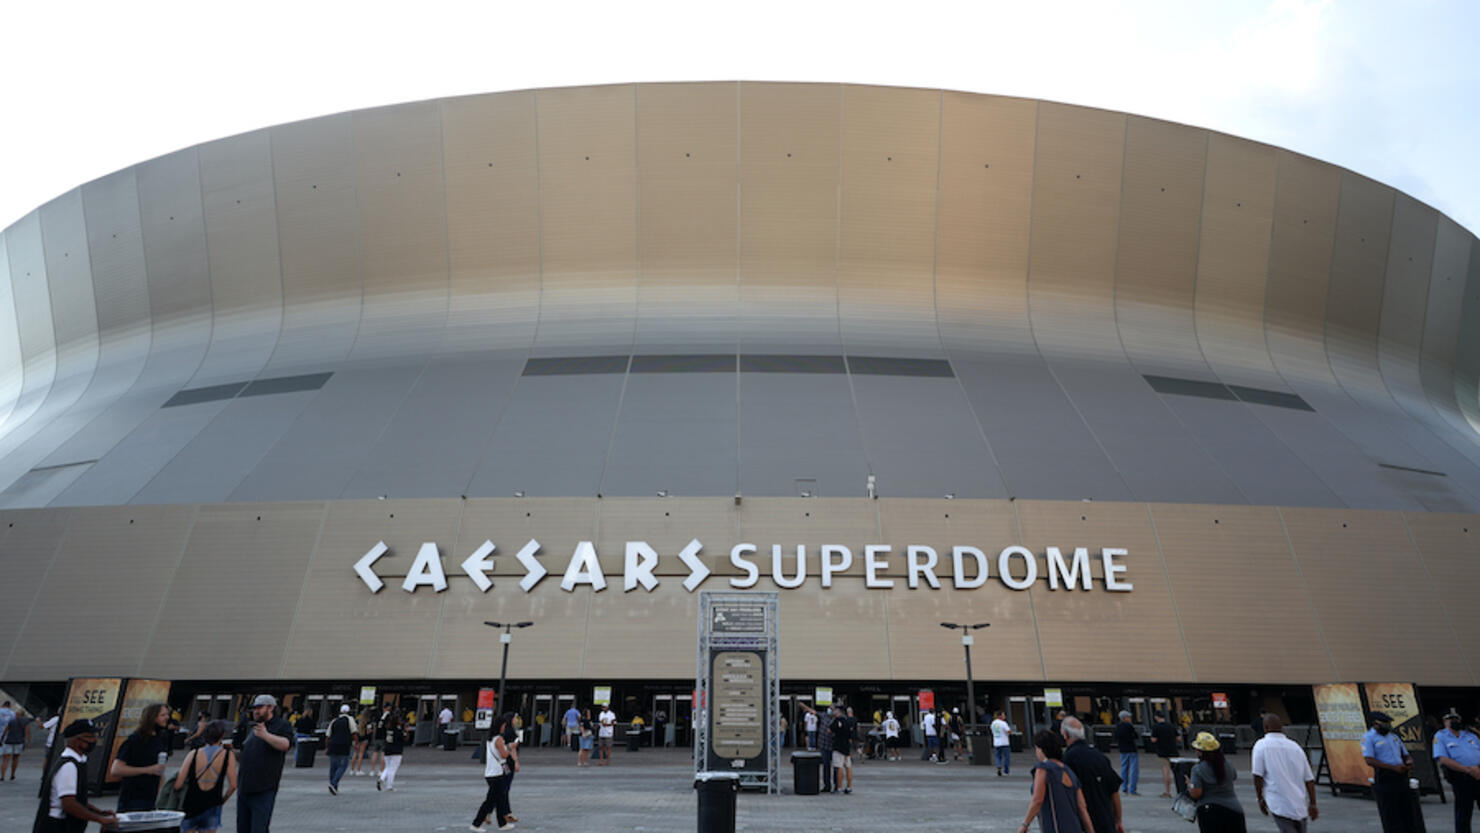 WATCH: New Orleans' Superdome Appears To Be On Fire